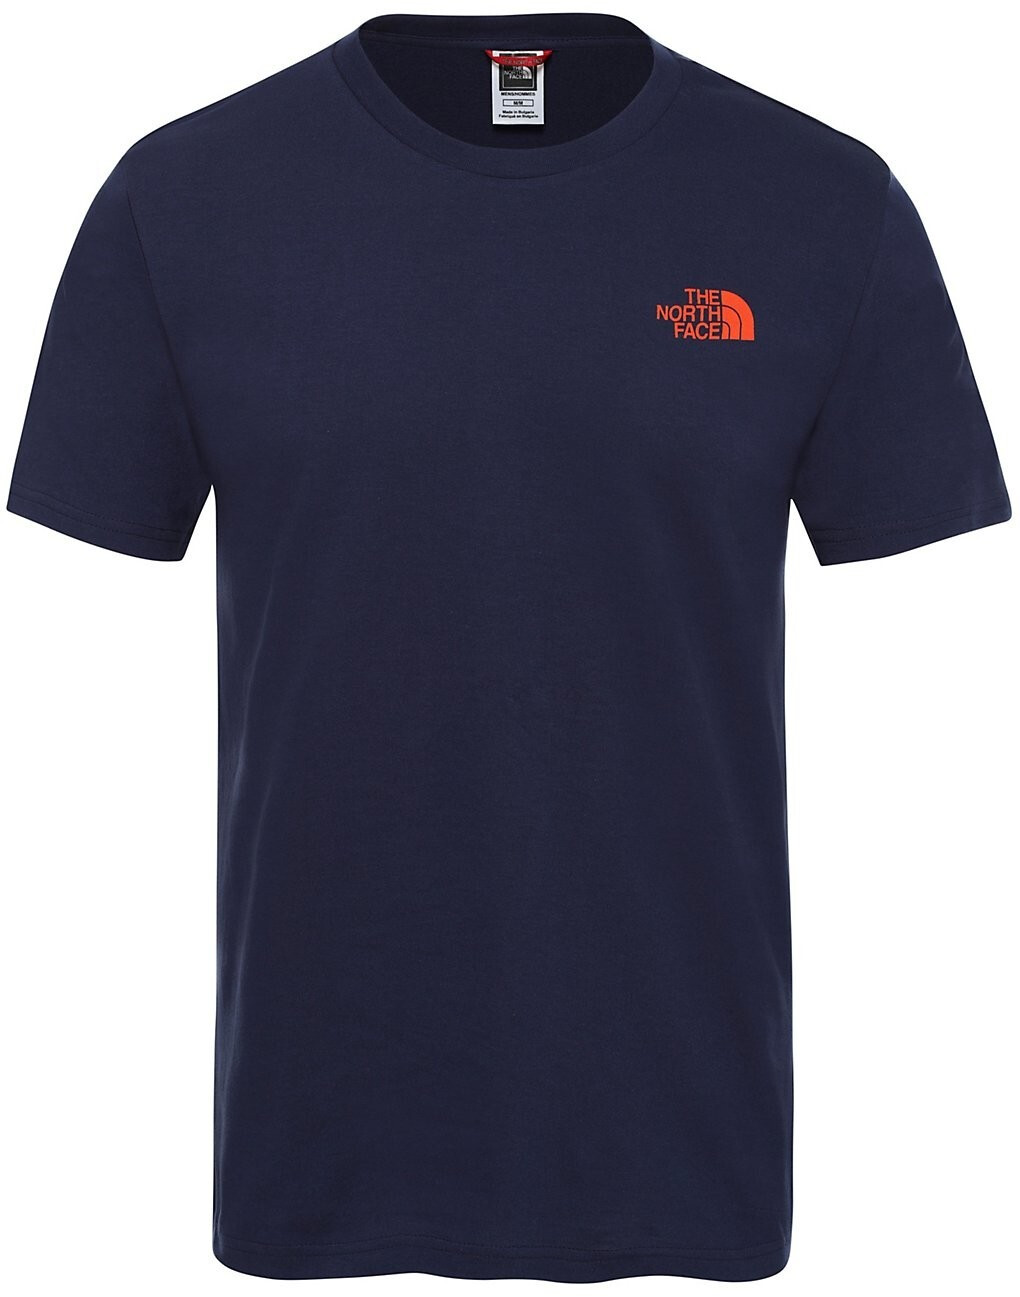 ødemark Rytmisk Reskyd Buy The North Face Men's Simple Dome T-Shirt (2TX5) from £13.99 (Today) –  Best Deals on idealo.co.uk